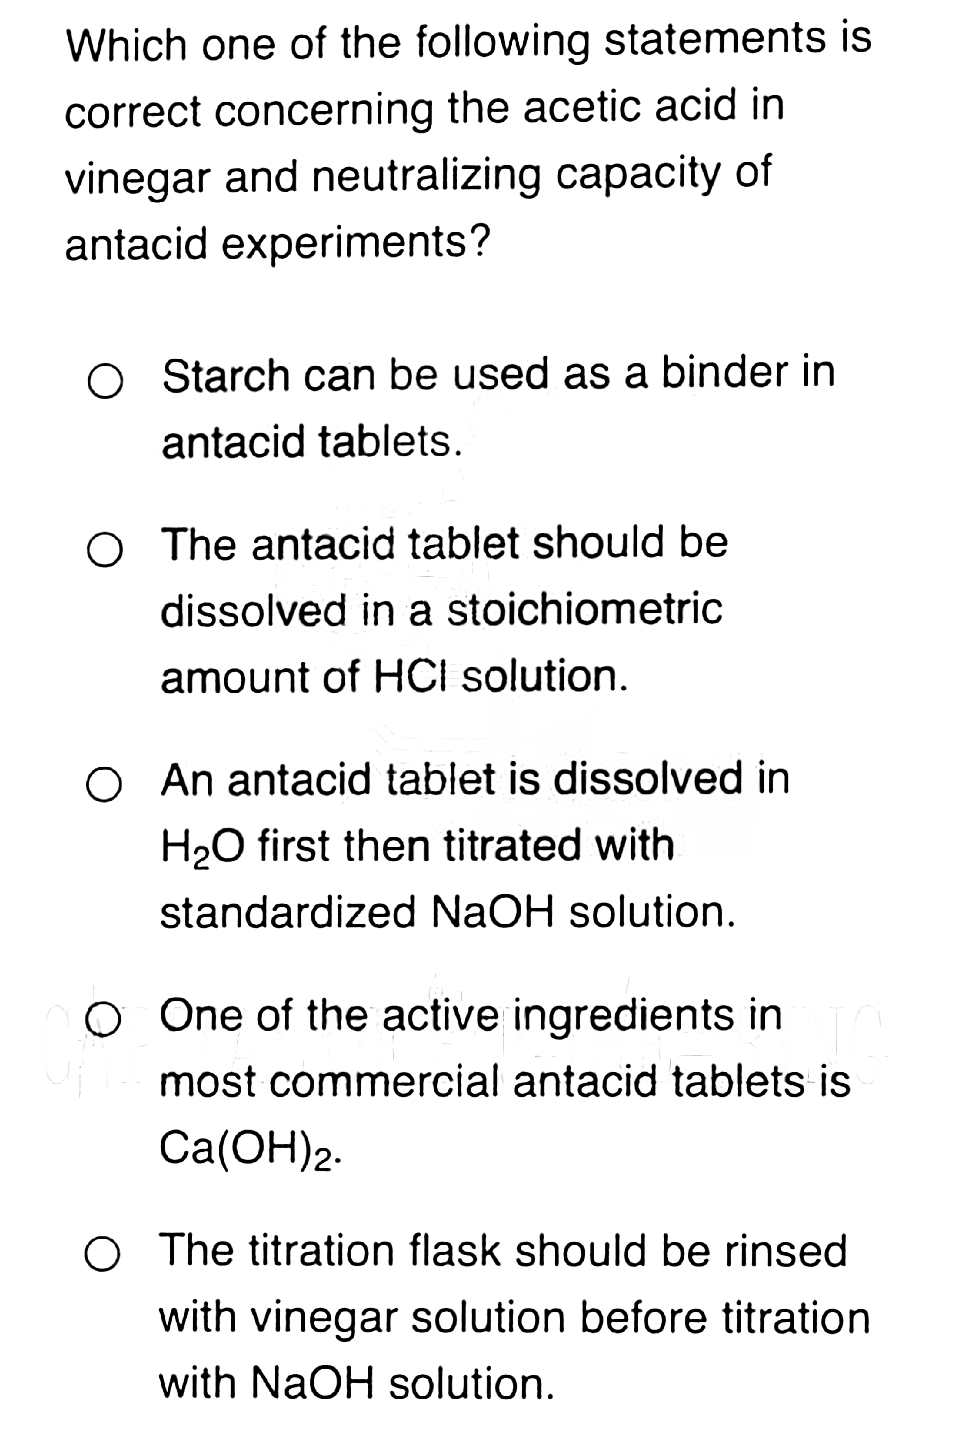 Which one of the following statements is
correct concerning the acetic acid in
vinegar and neutralizing capacity of
antacid experiments?
O Starch can be used as a binder in
antacid tablets.
O The antacid tablet should be
dissolved in a stoichiometric
amount of HCI solution.
O An antacid tablet is dissolved in
H₂O first then titrated with
standardized NaOH solution.
O One of the active ingredients in
most commercial antacid tablets is
Ca(OH)2.
O The titration flask should be rinsed
with vinegar solution before titration
with NaOH solution.